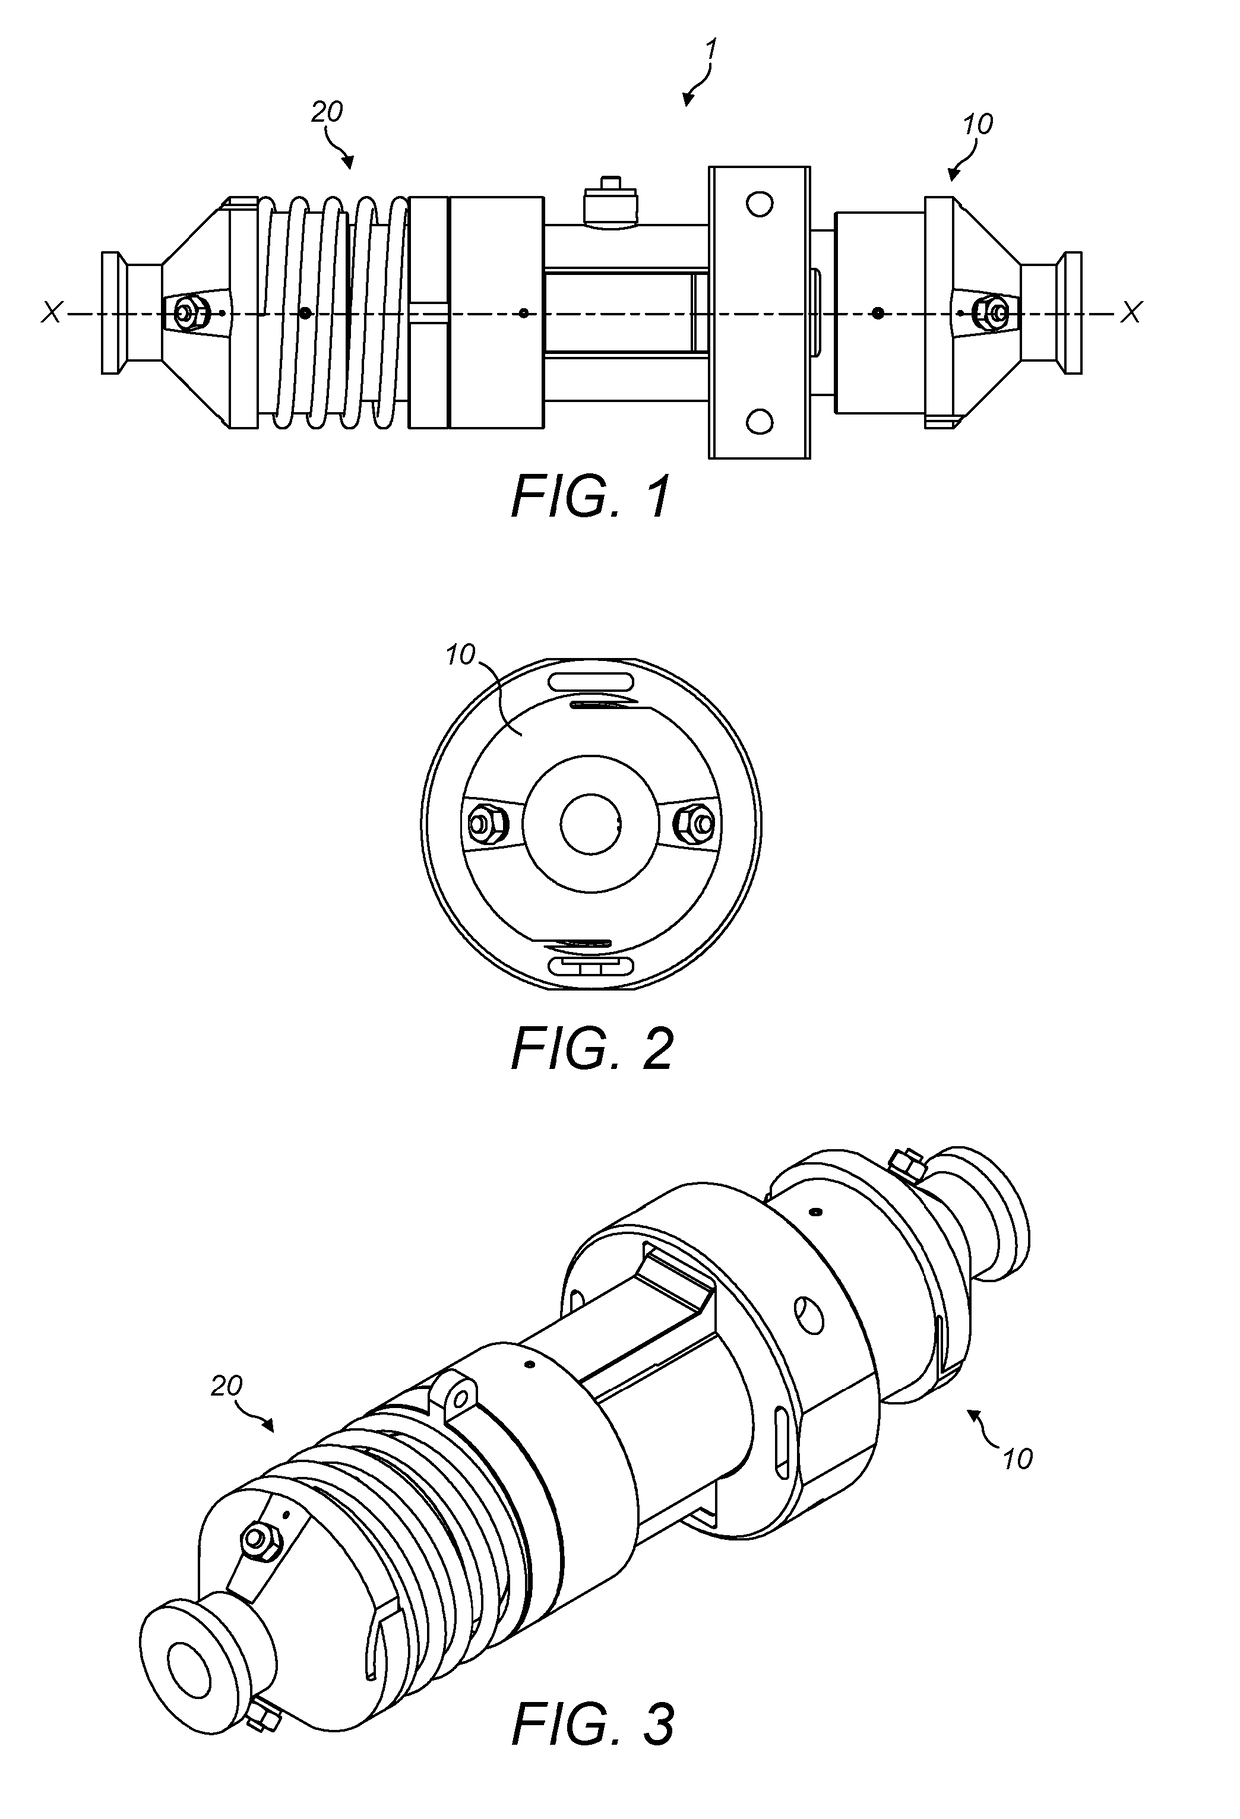 Flow line connector assembly